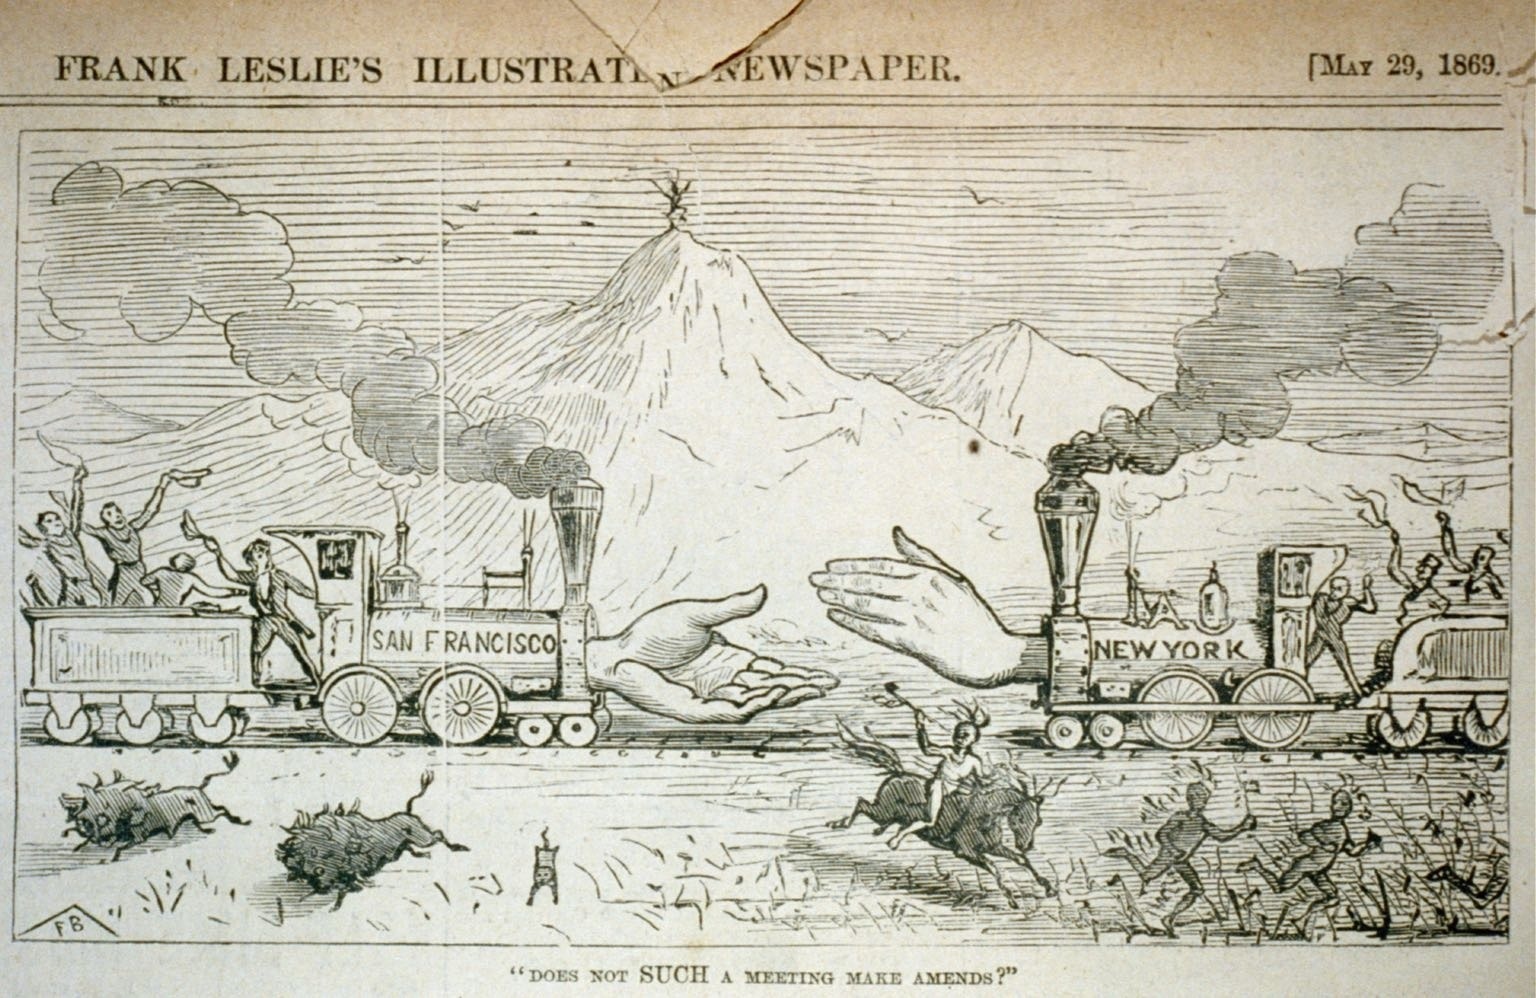 The railroad unites America's east and west coasts. Cartoon printed in Frank Leslie's Illustrated Newspaper, 1869. Credit: Library of Congress